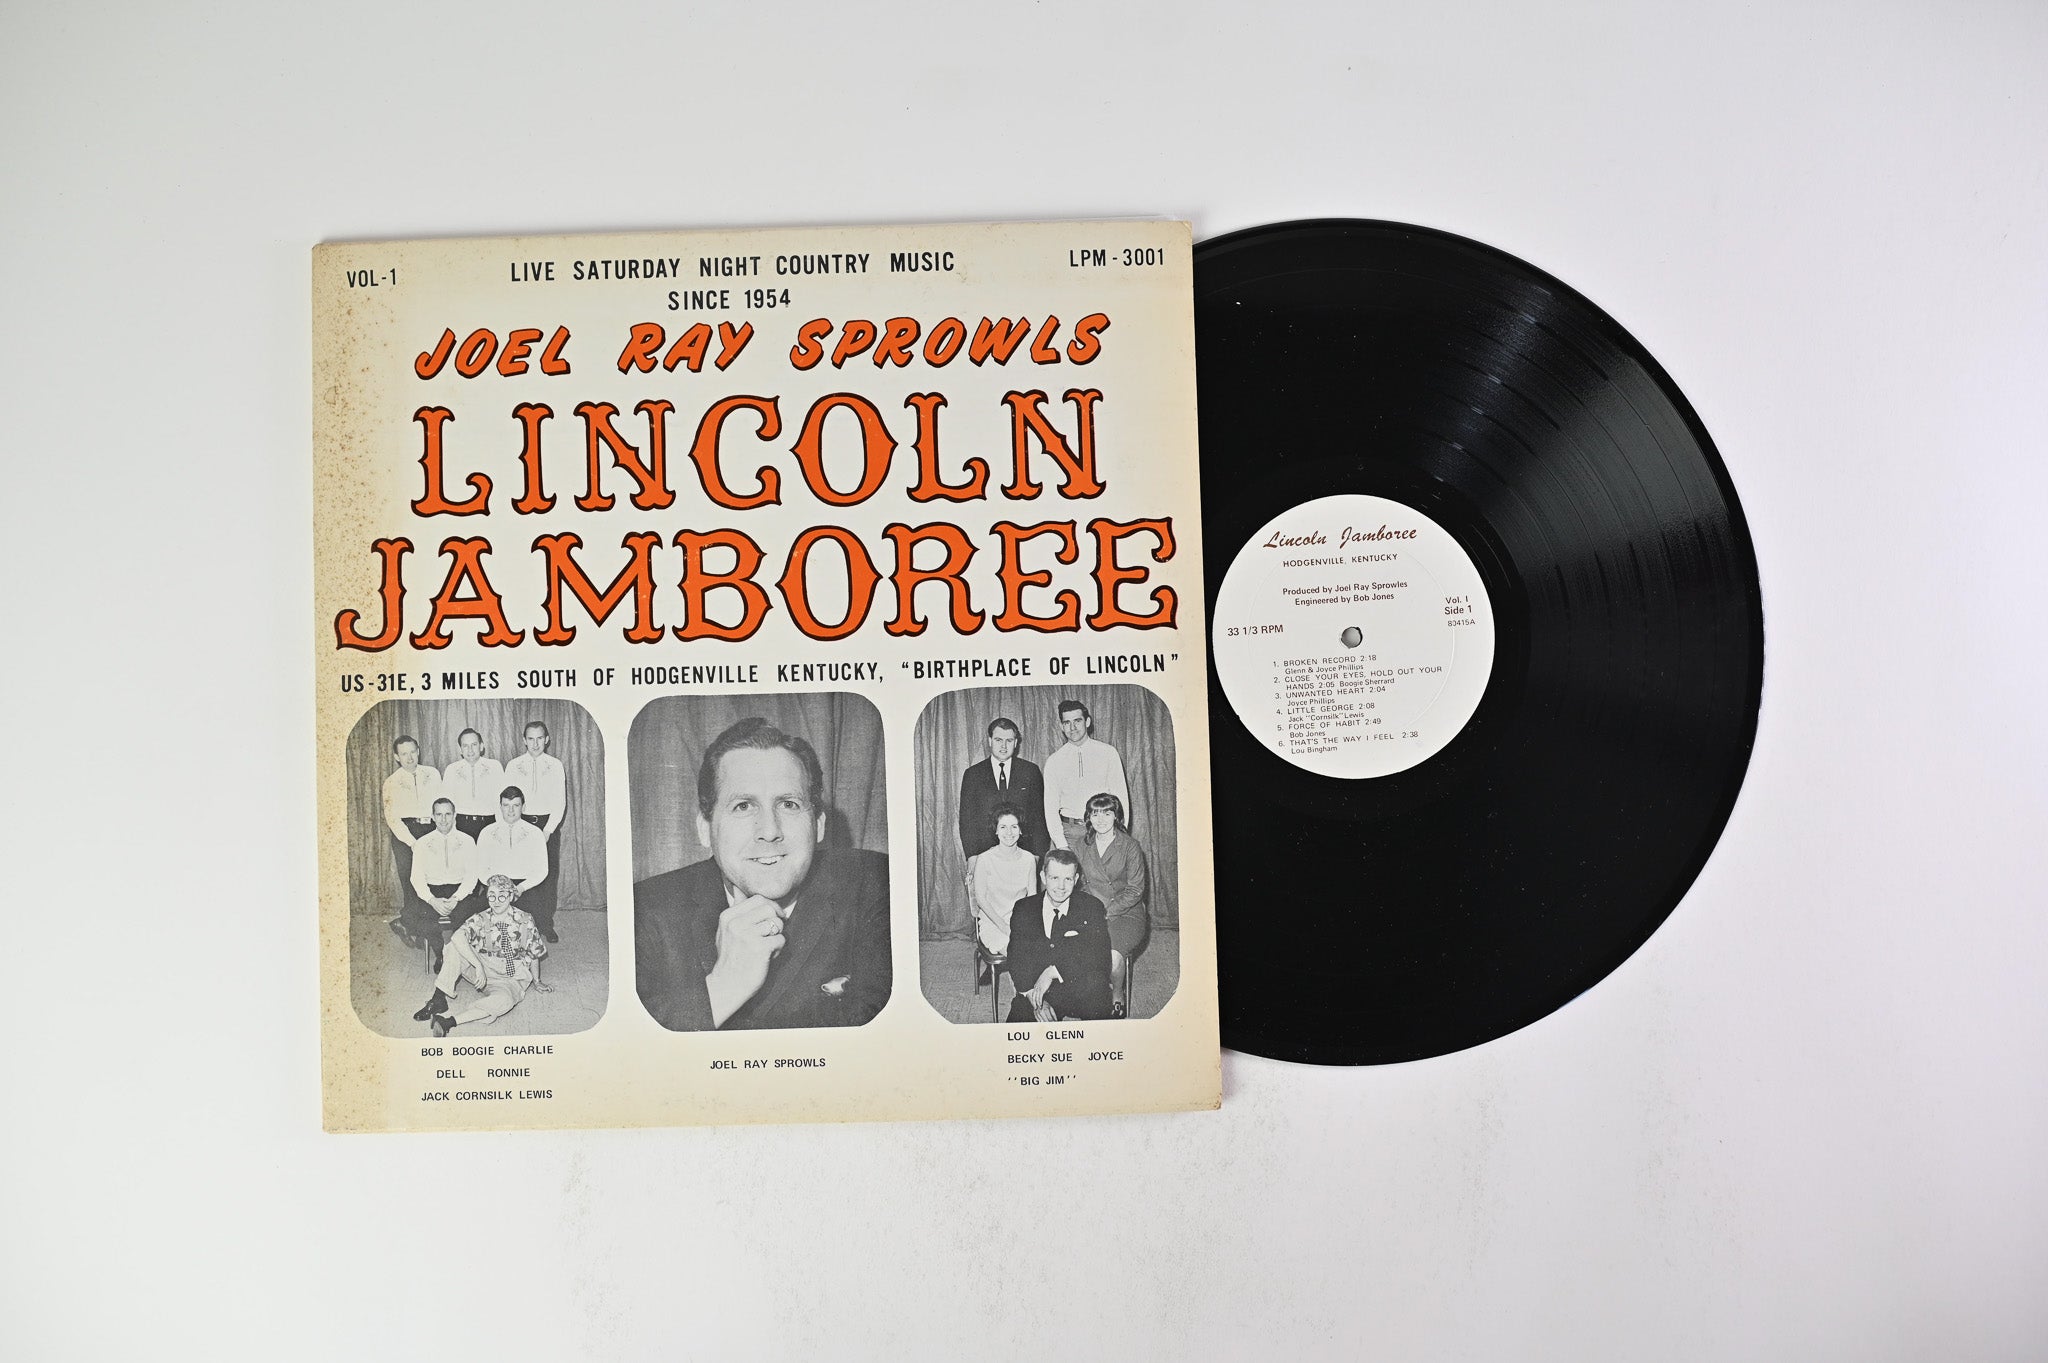 Various - Joel Ray Sprowls Lincoln Jamboree on Queen City Album Co.